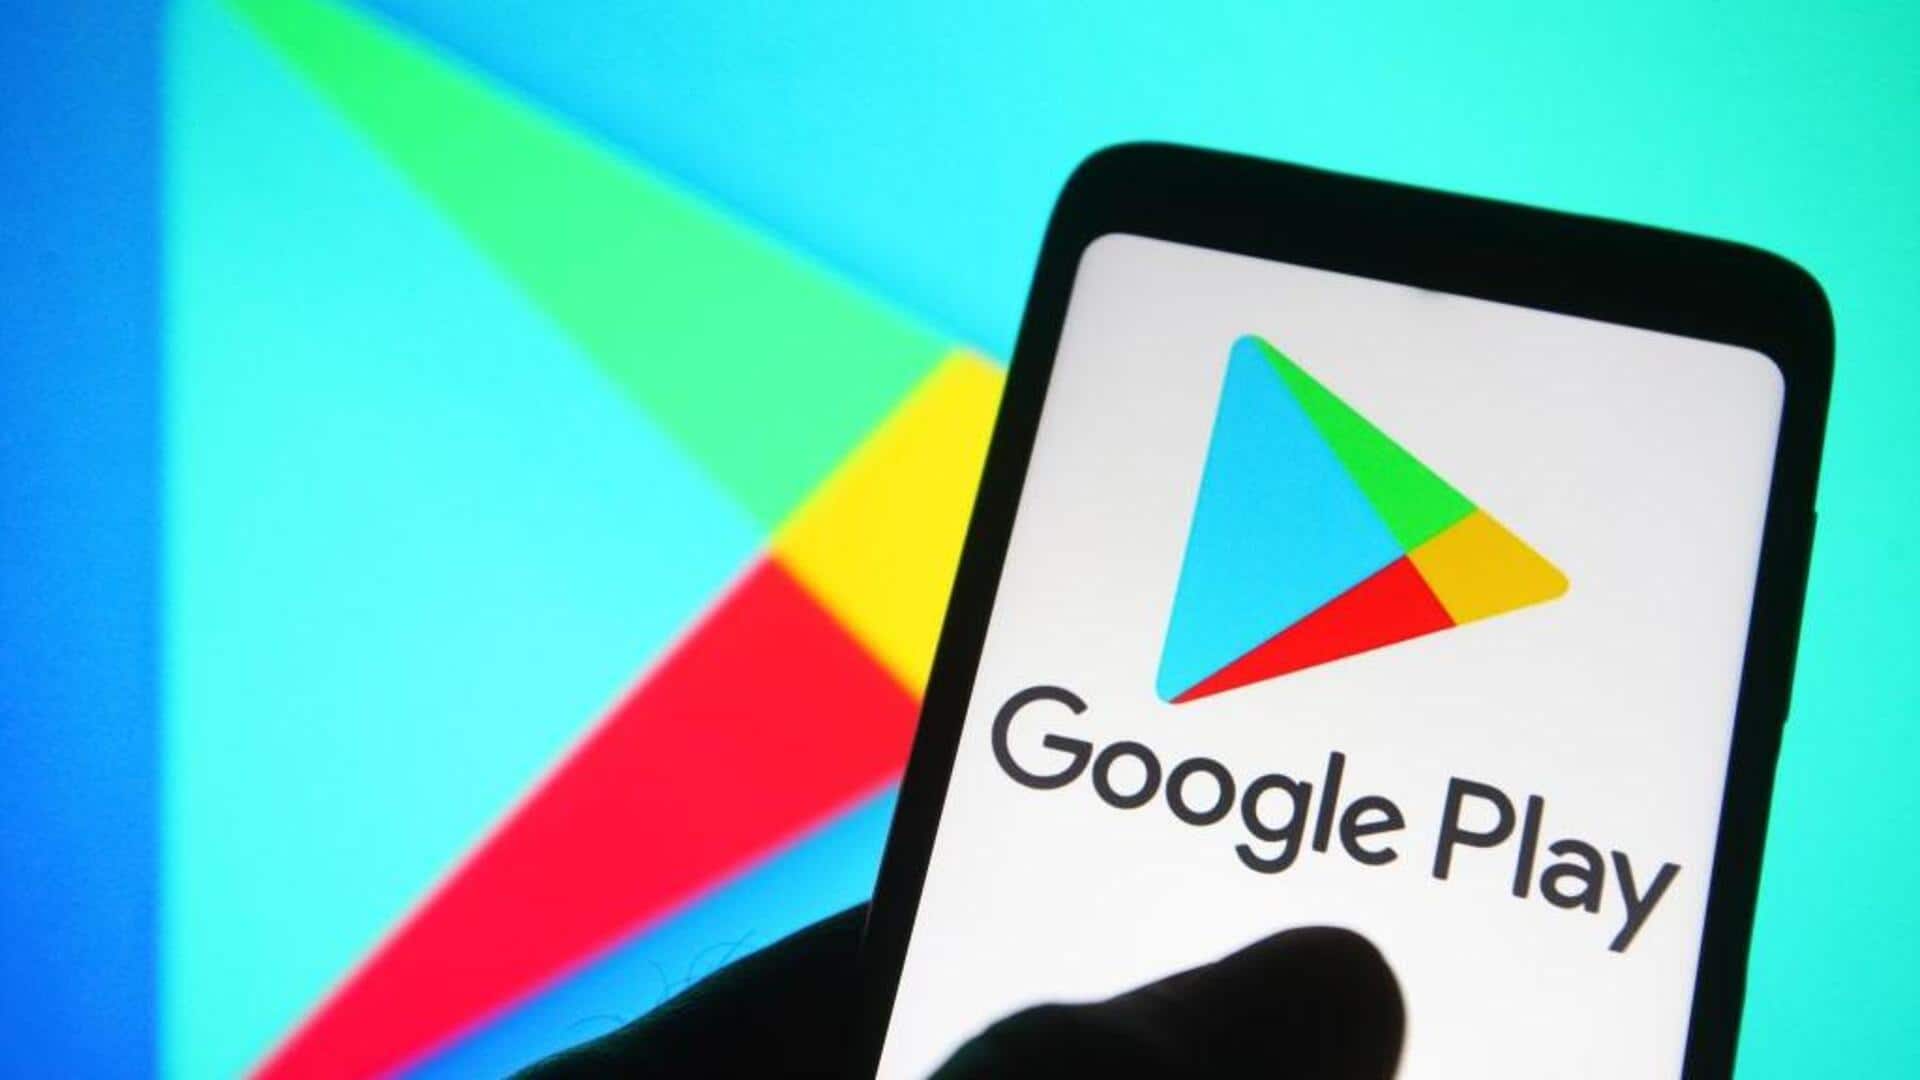 New Google Play feature lets users request purchases from friends